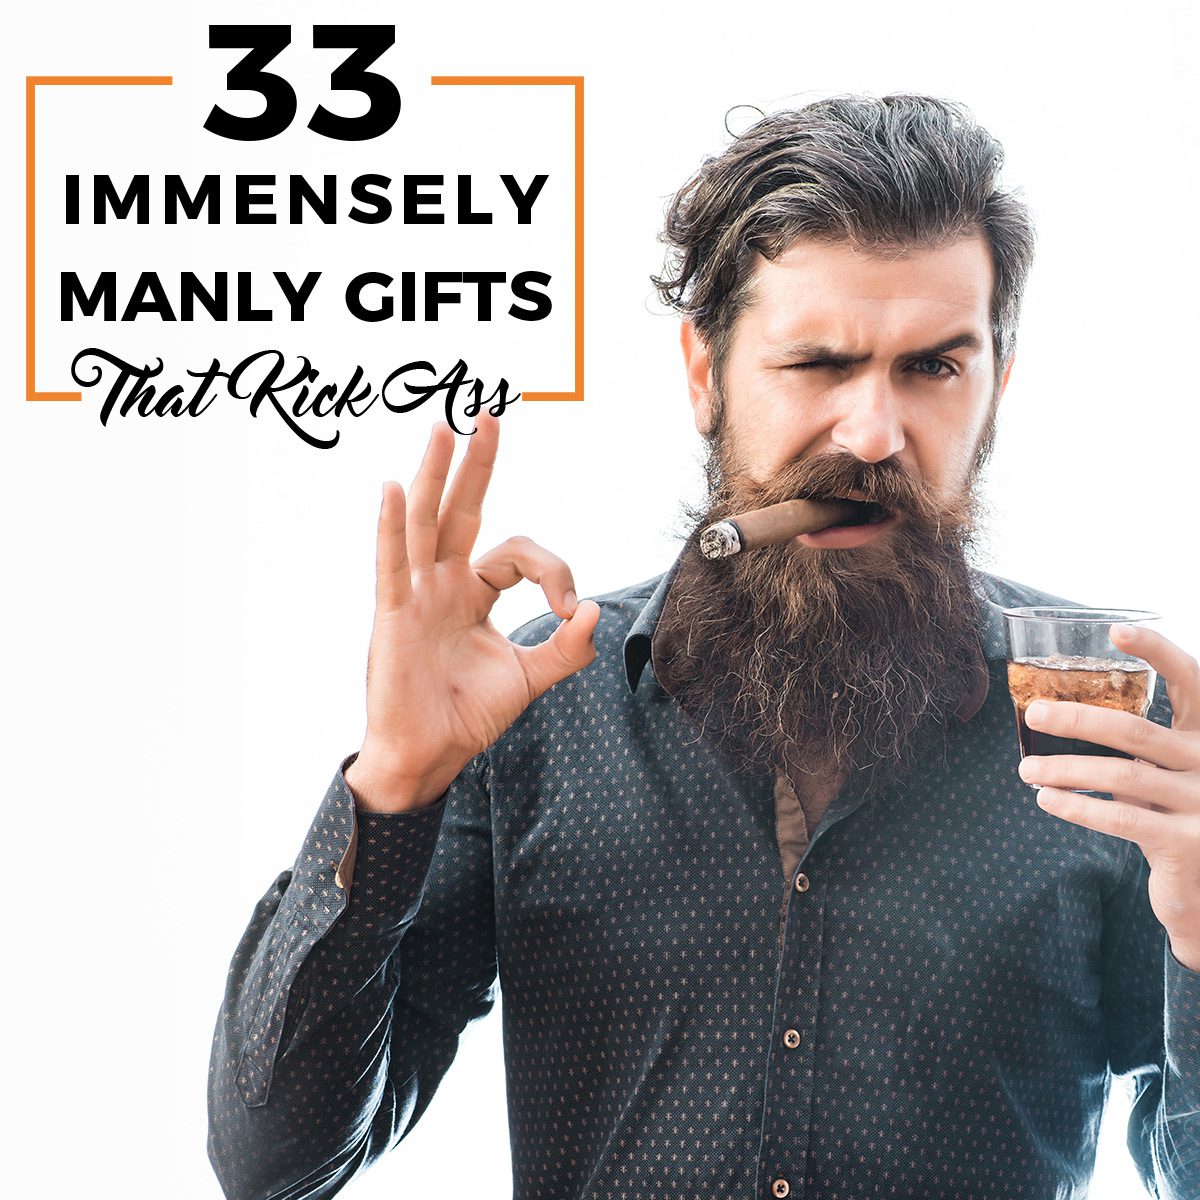 33 Immensely Manly Gifts That Kick Ass